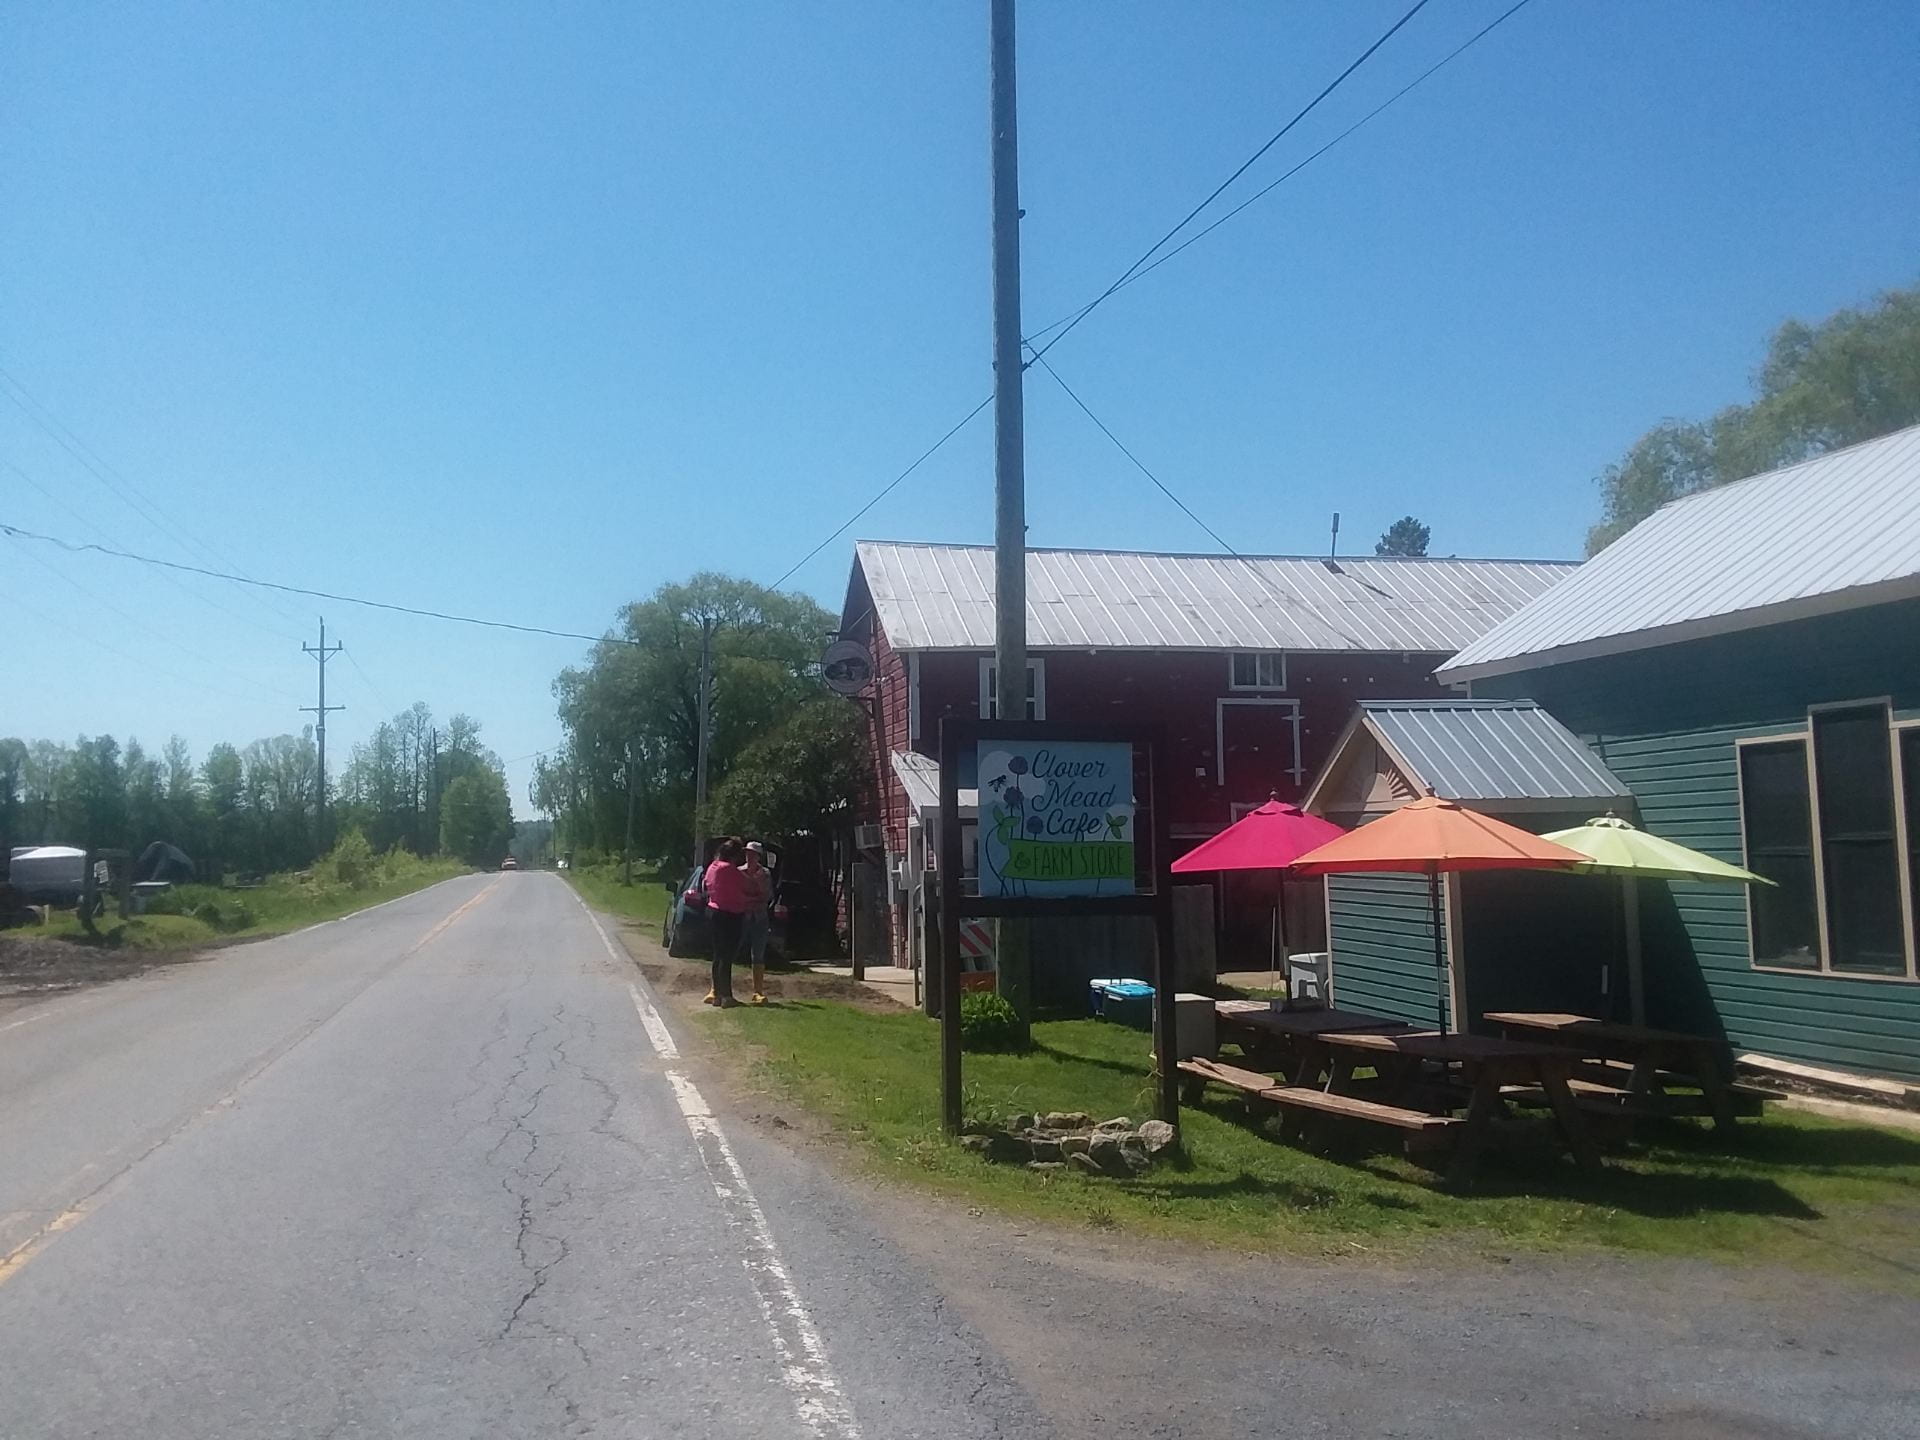 Photo of public area in front of North Country Creamery